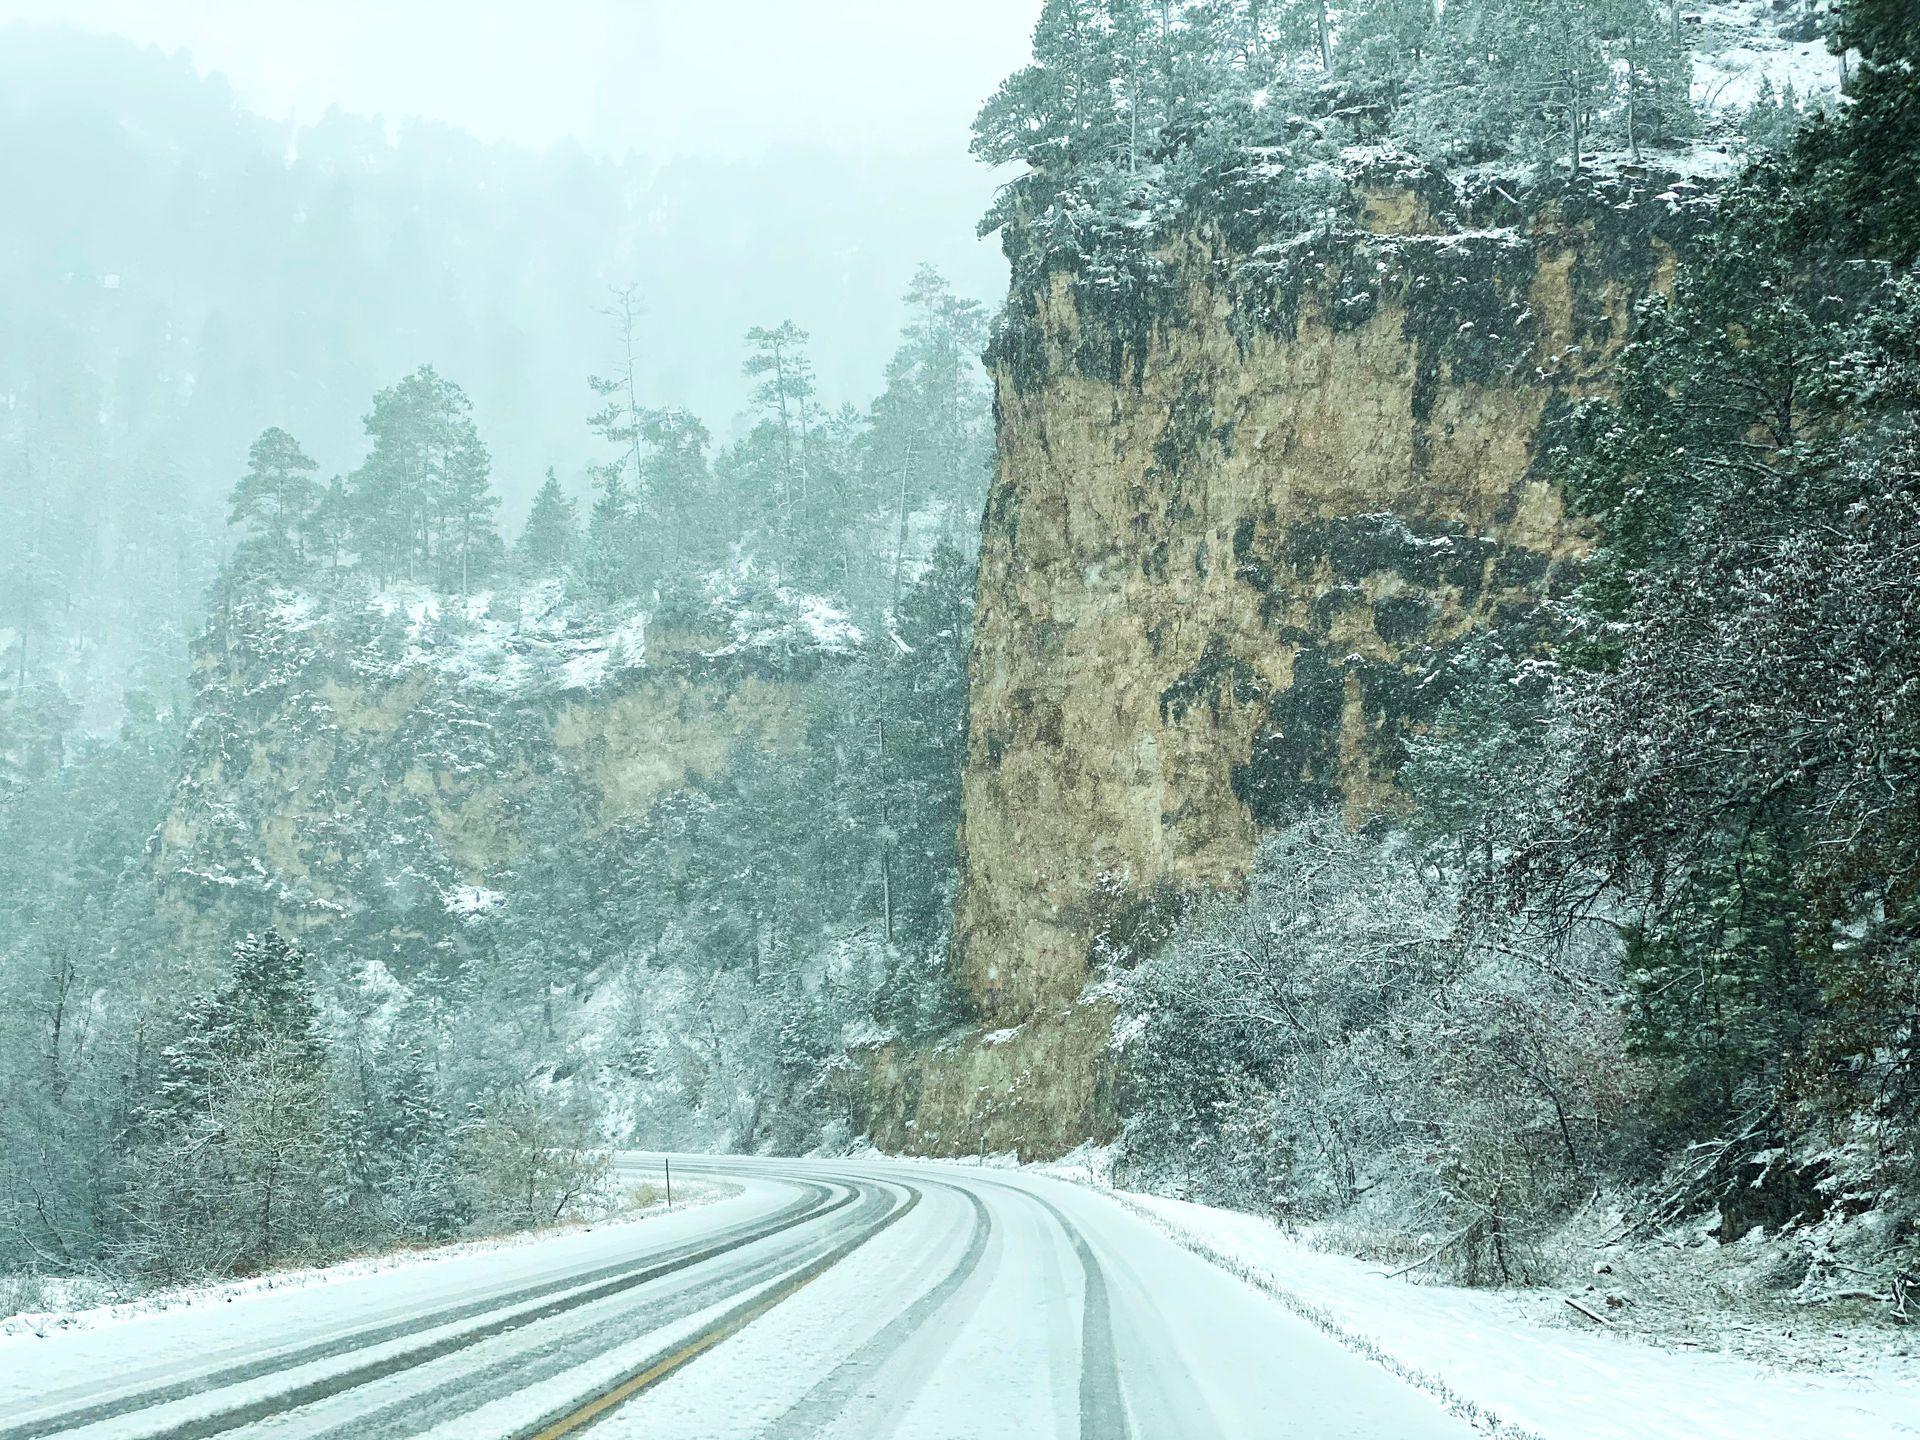 A snow covered road with a rock towering up on one side.